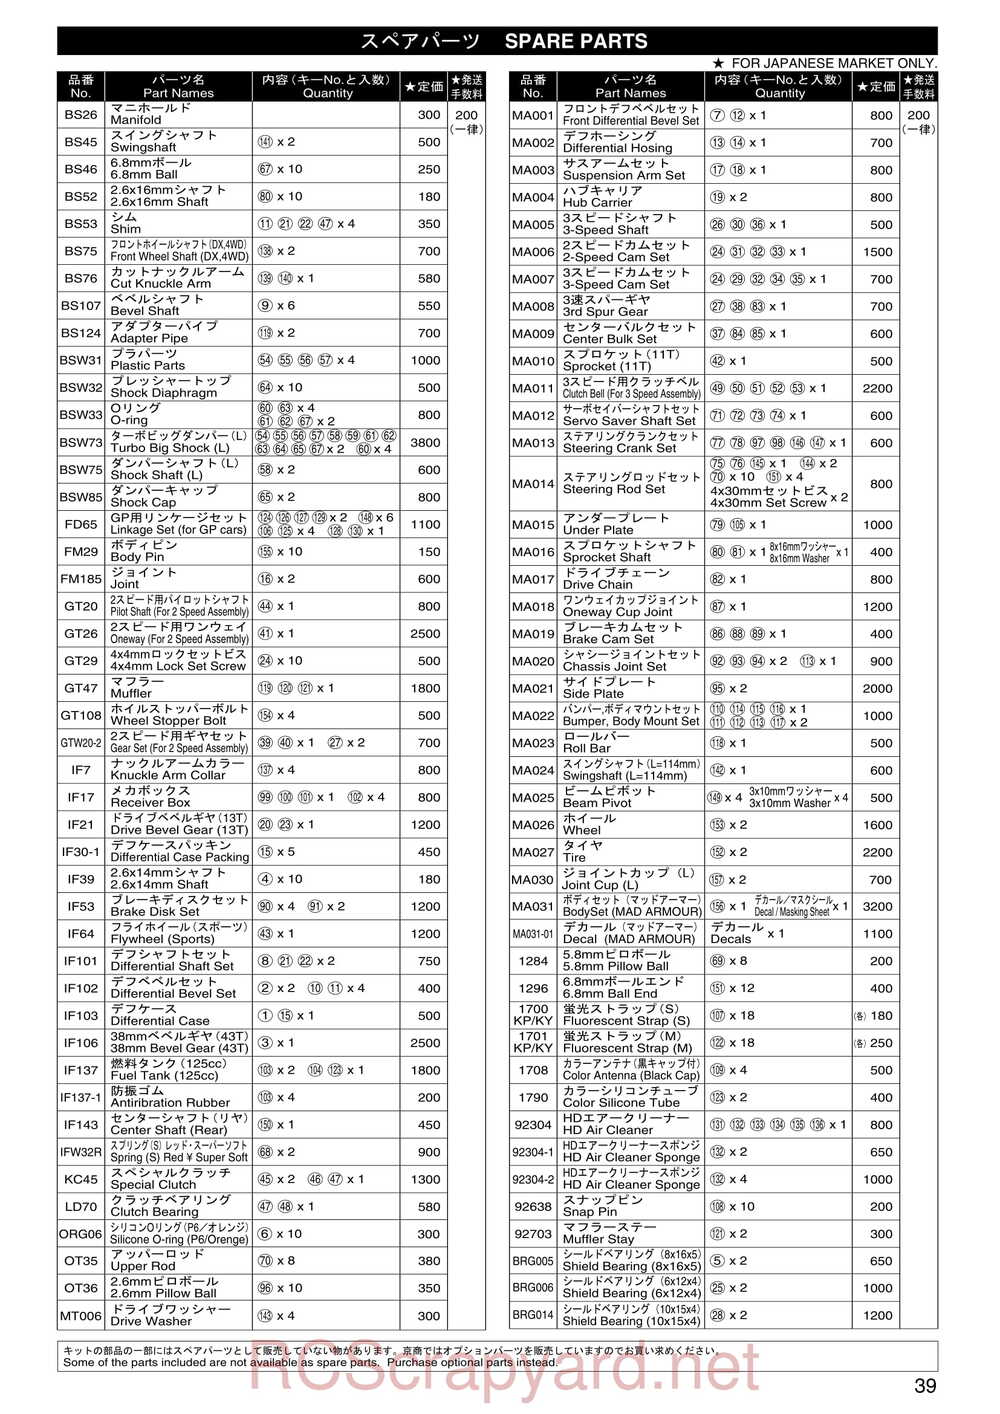 Kyosho - 31224 - Mad-Armour - Manual - Page 38